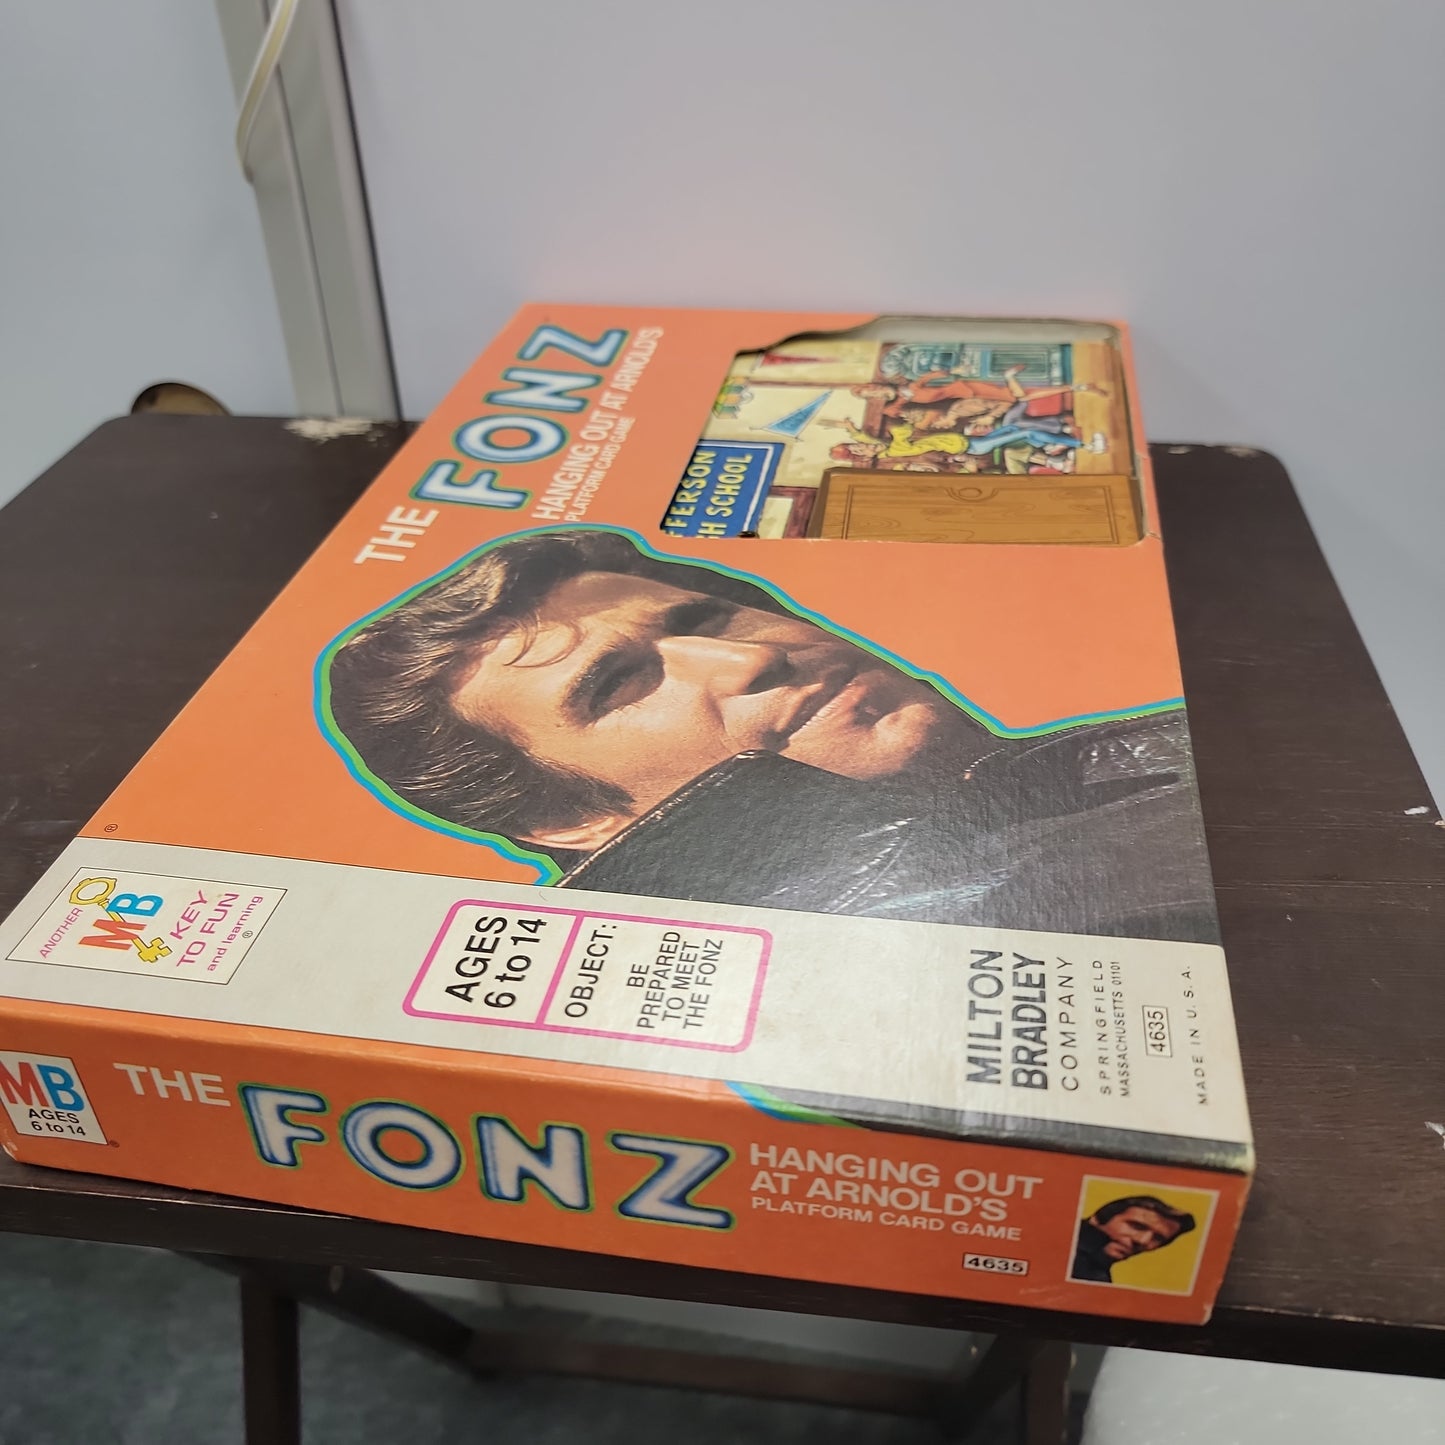 The Fonz Hanging Out At Arnold's Board Game